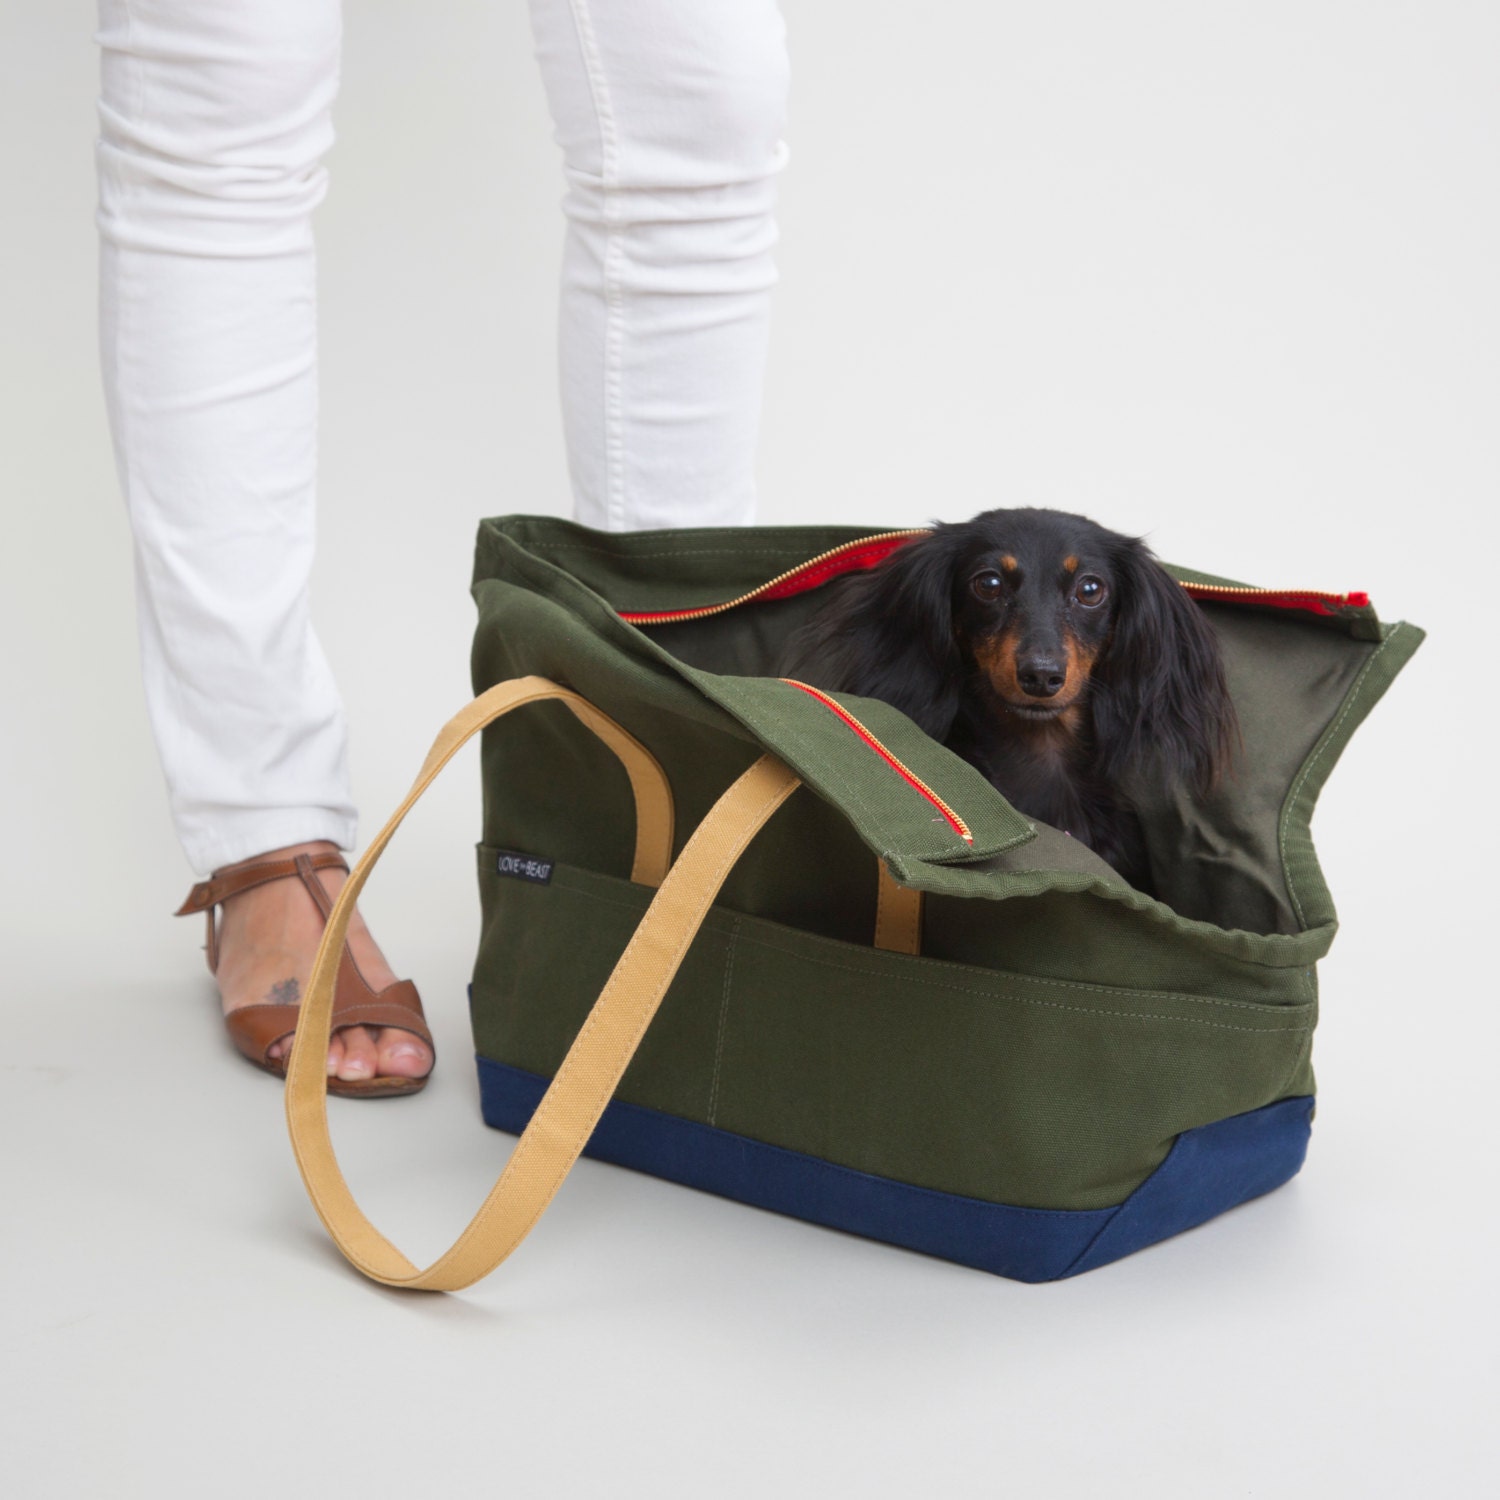 Canvas Pet Tote Olive & Navy Dog Carrier by LoveThyBeast on Etsy